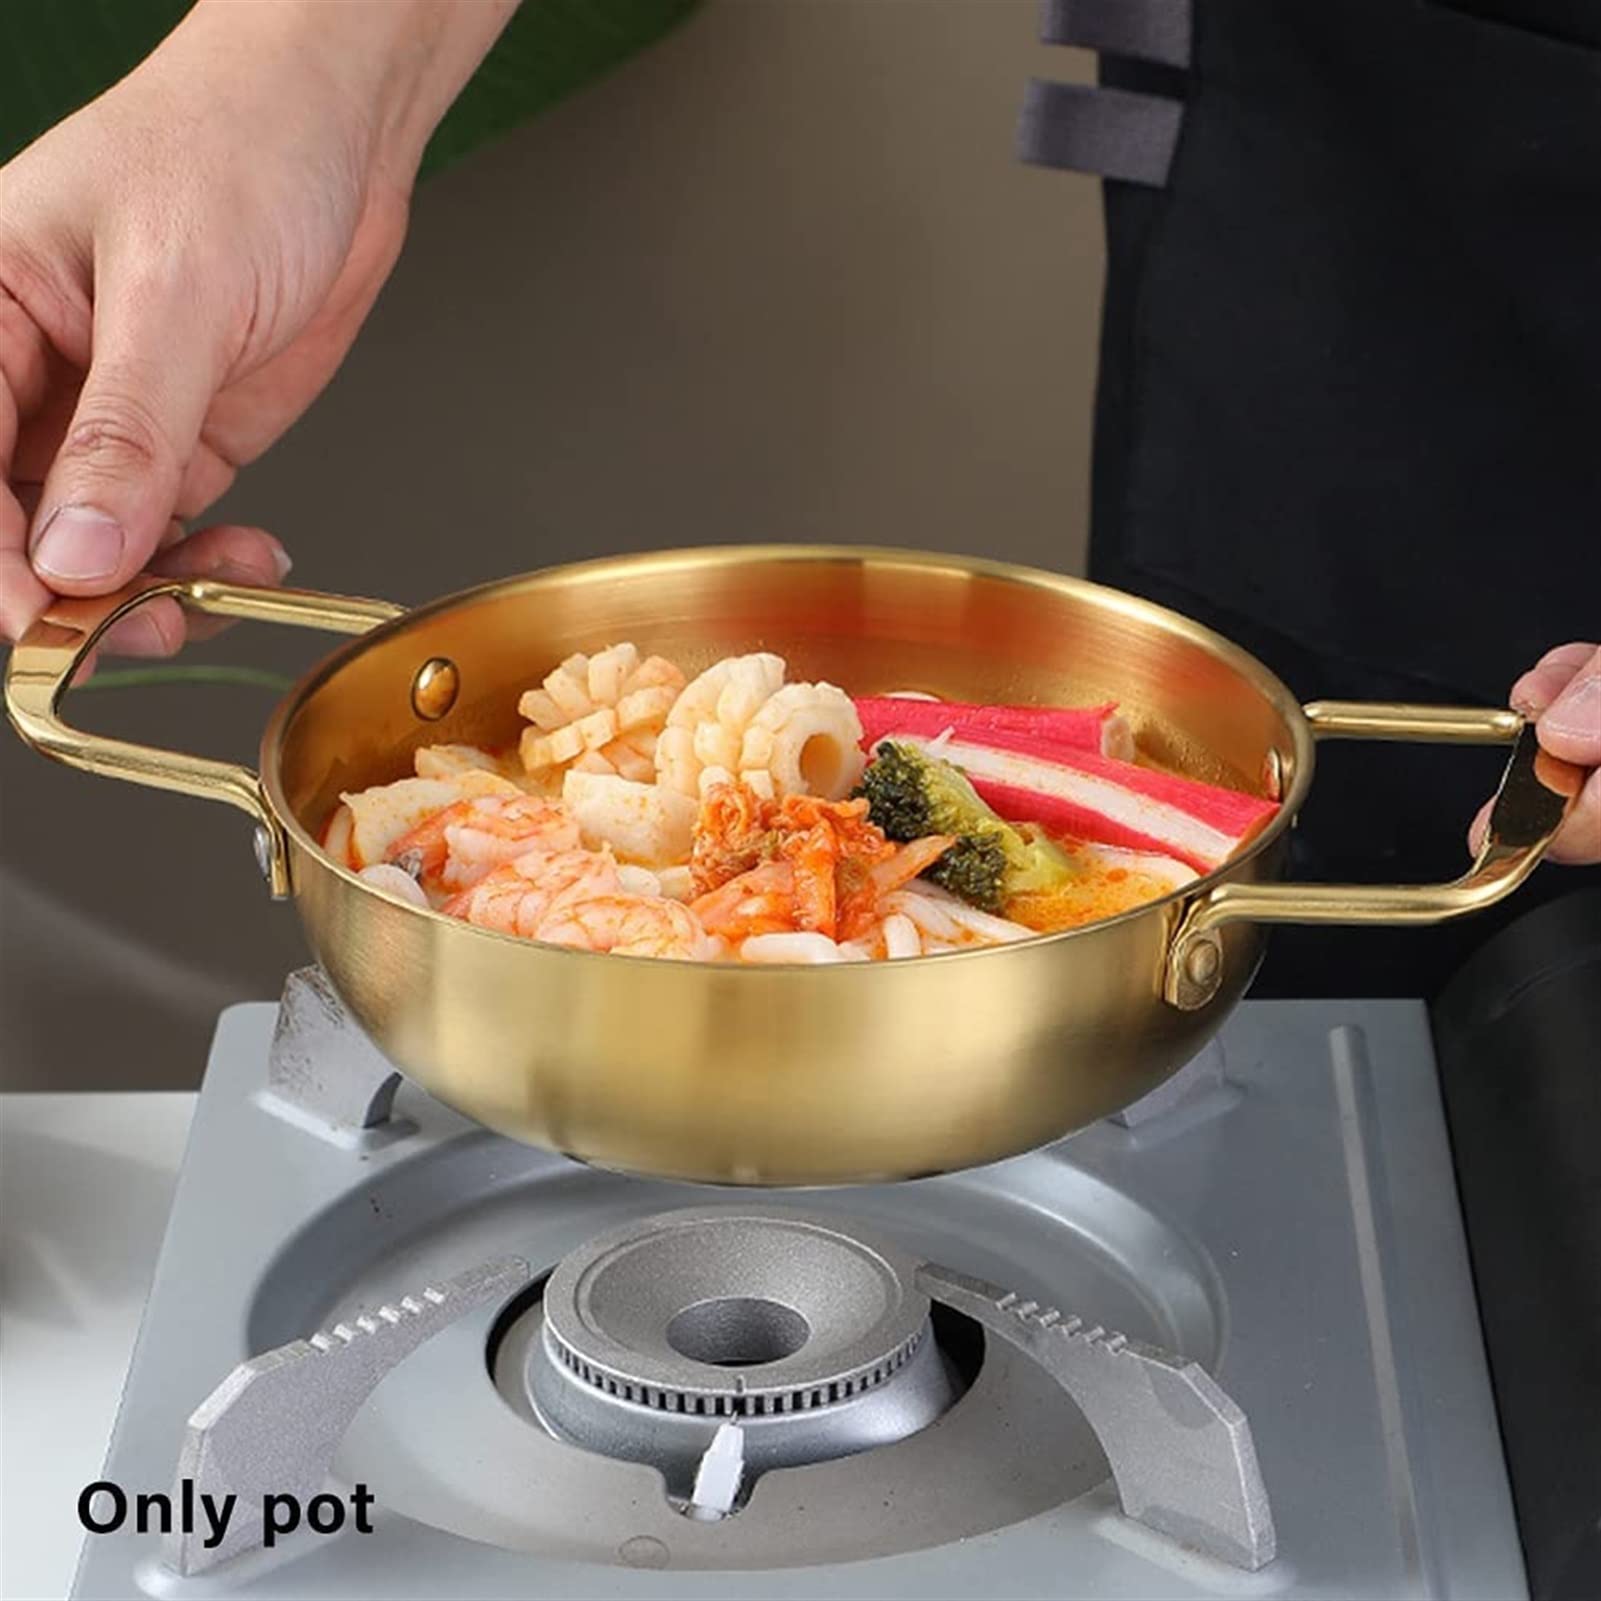 26cm Gold Seafood Paella Pan with Riveted Chrome Plated Handles Dishwasher Safe